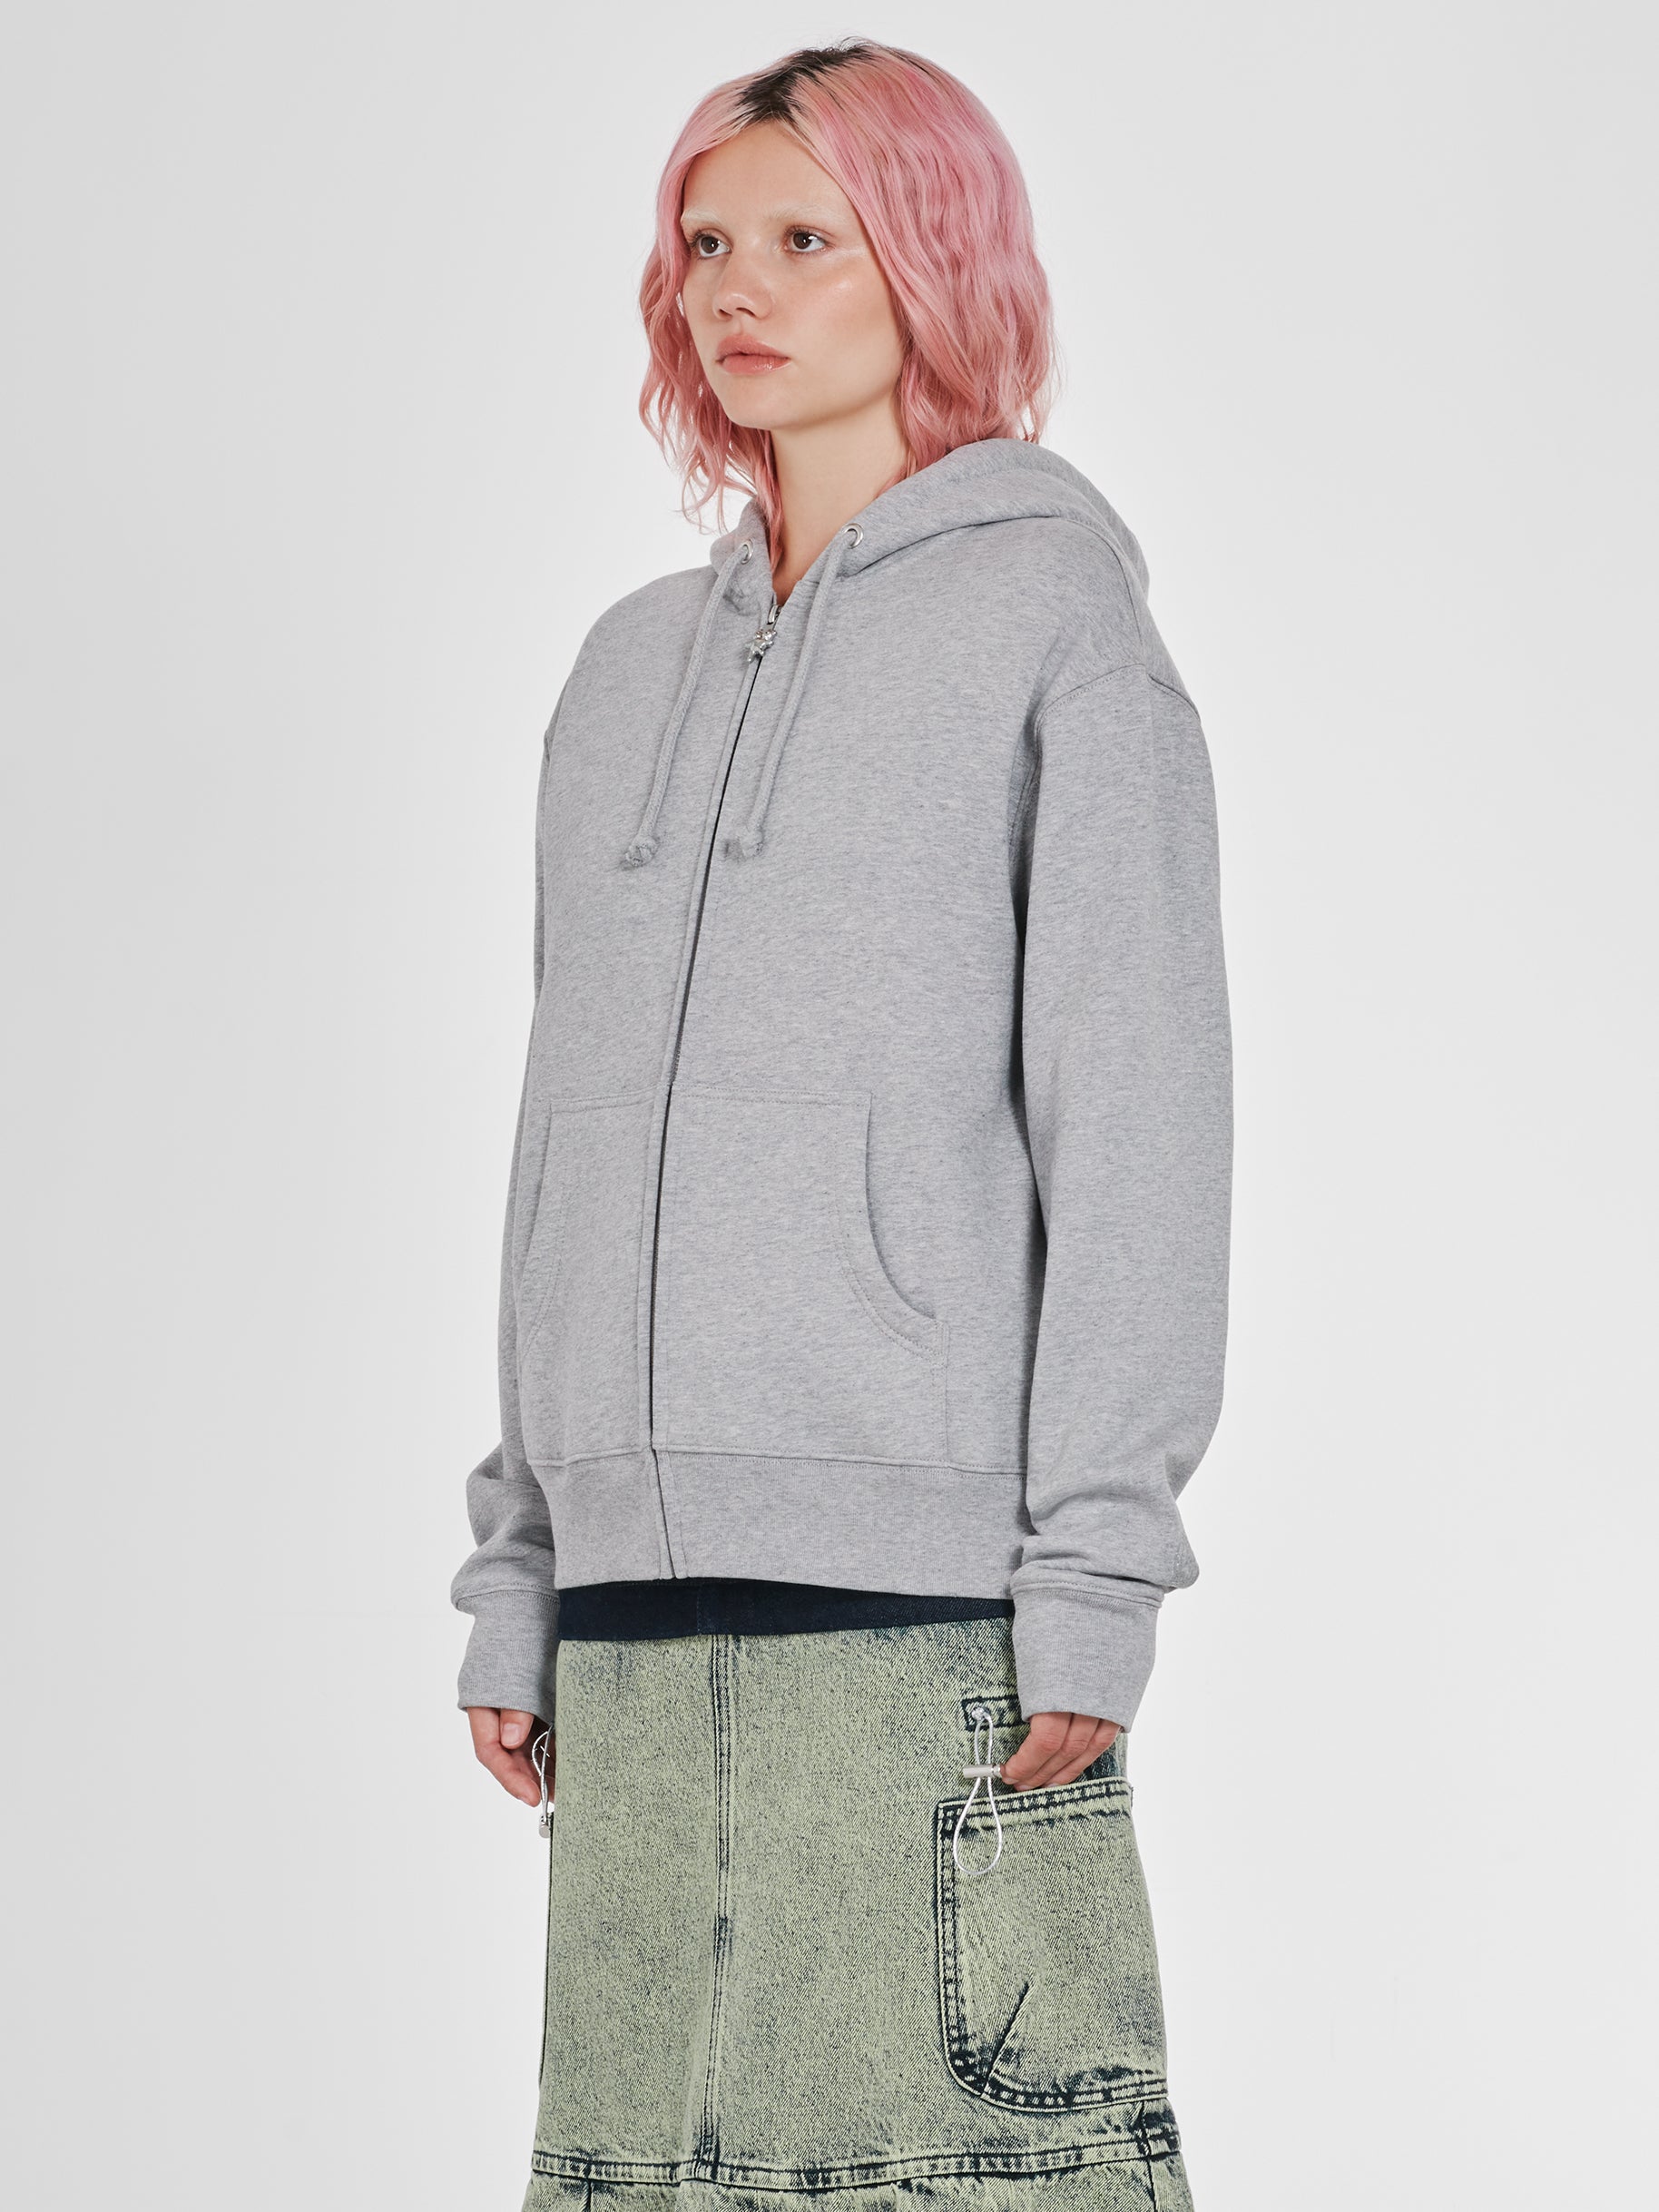 Heaven By Marc Jacobs - Women’s Donnie’s All-In-One Zip-Up - (Grey)